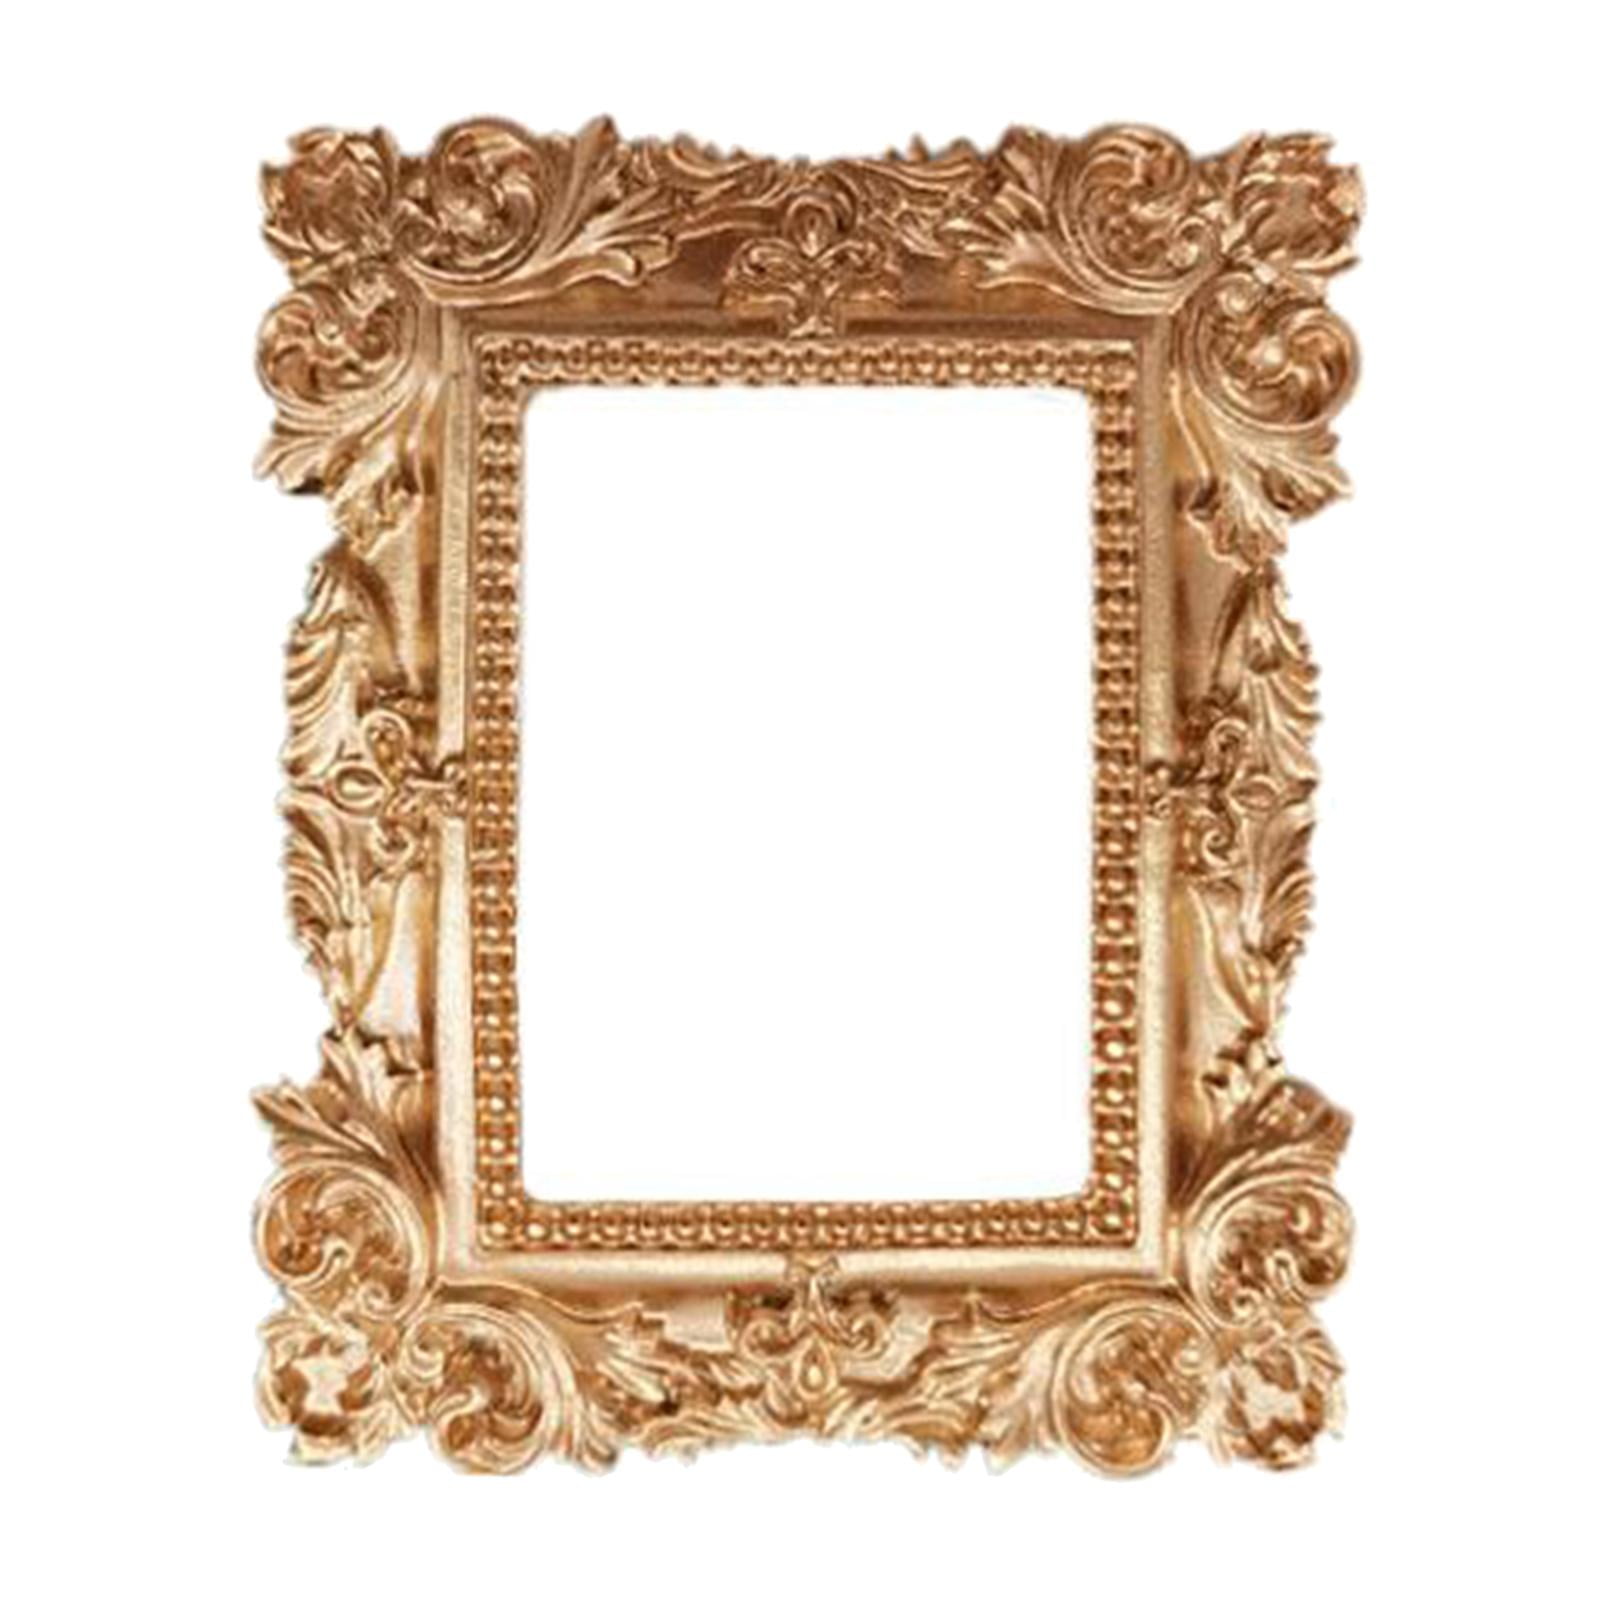 Decorative Paper Frame Stock Photo, Picture and Royalty Free Image. Image  5521651.